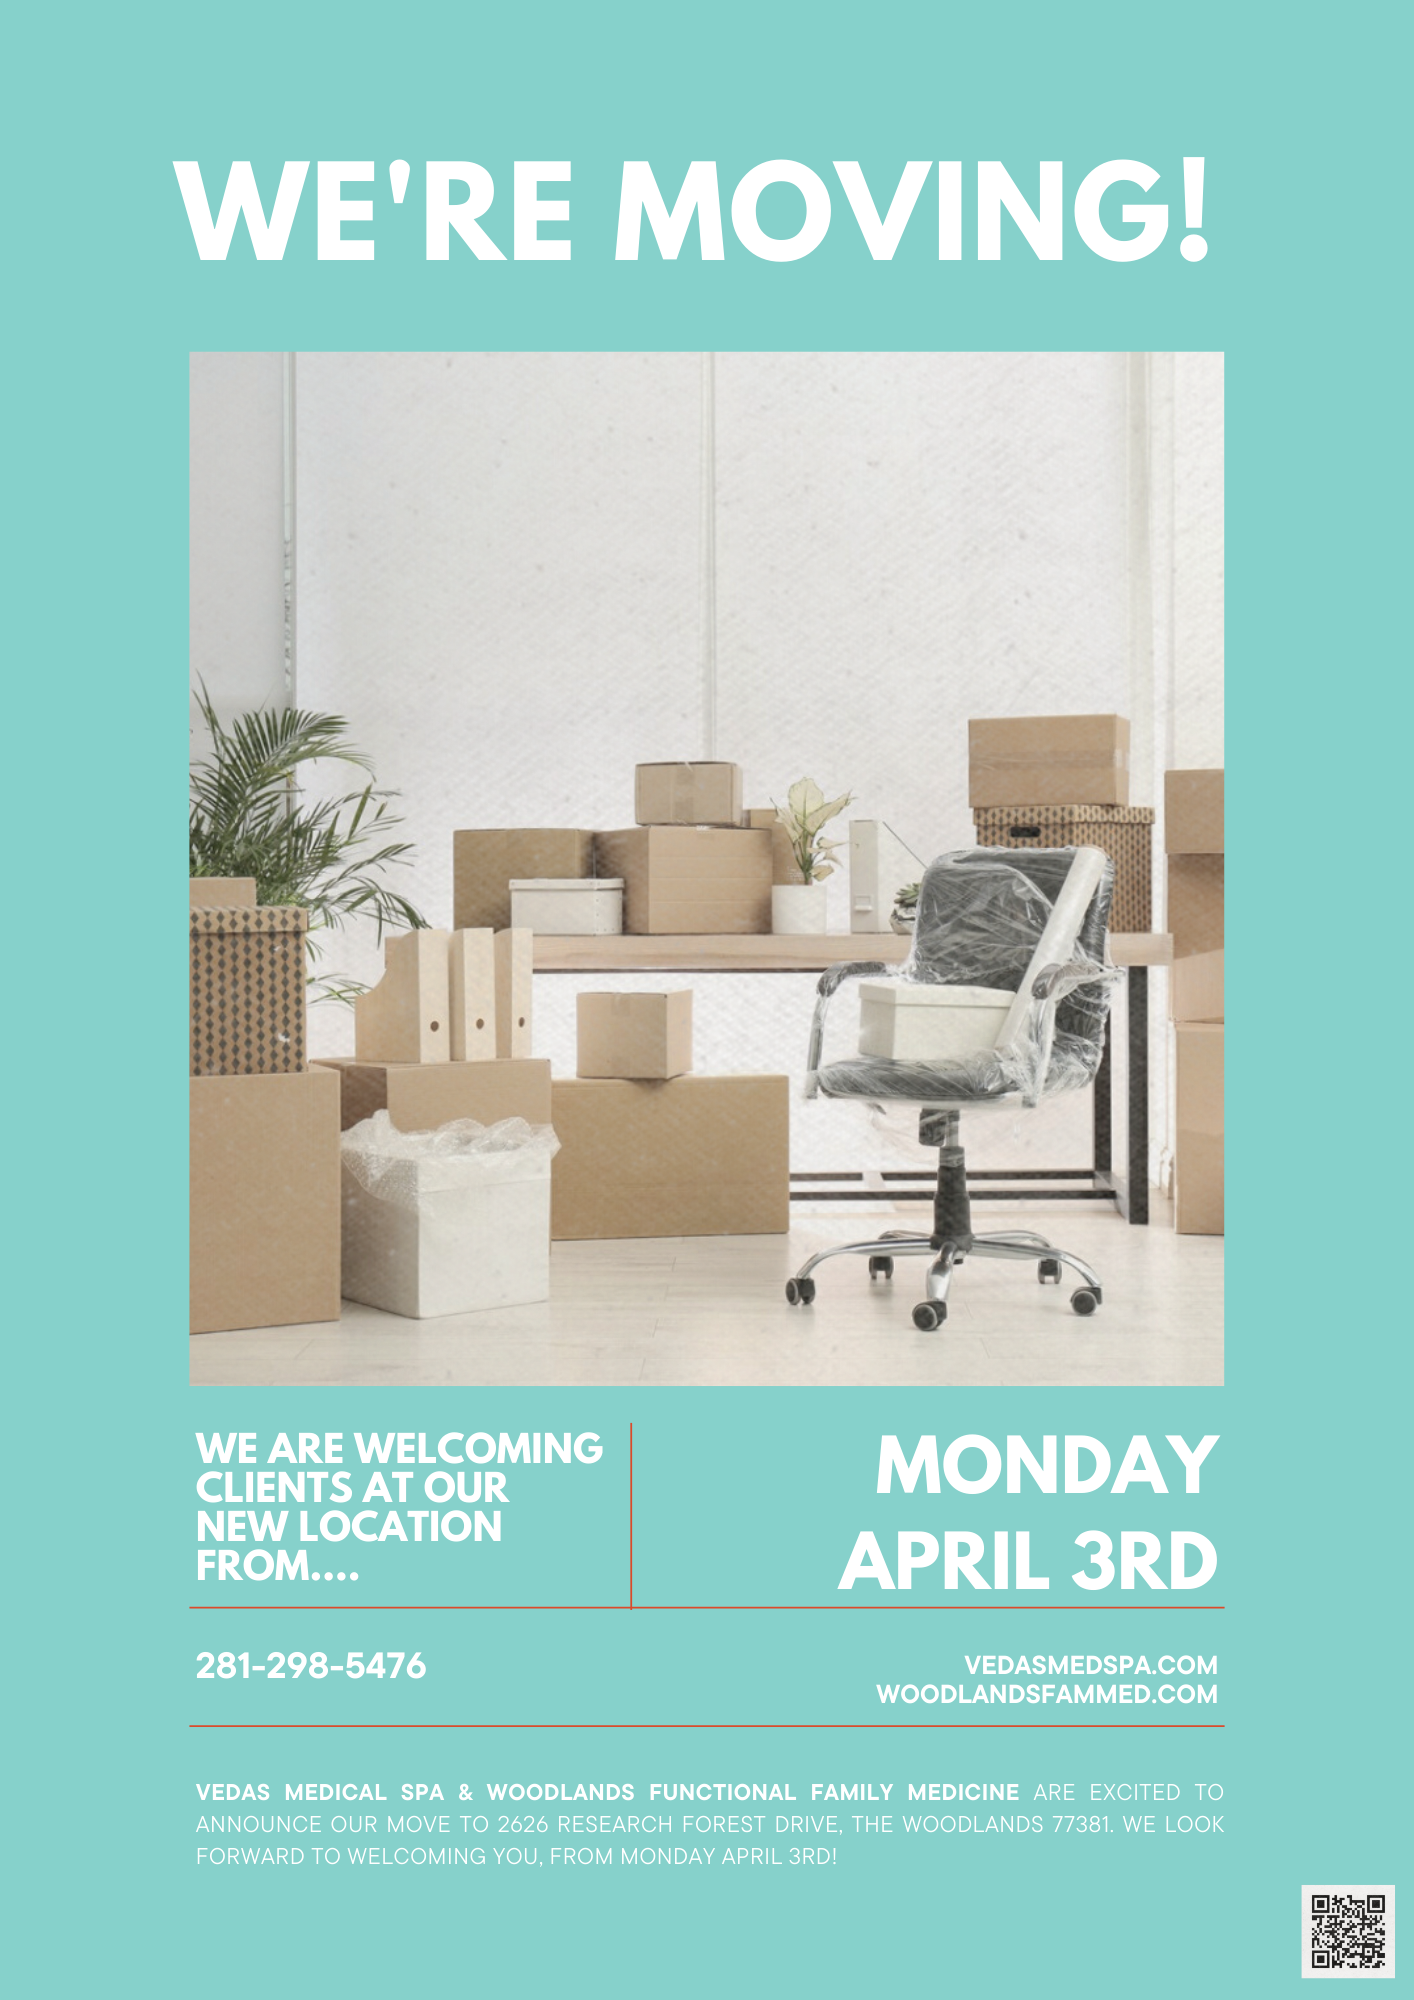 Move: Dr Nangrani welcomes you from April 3rd